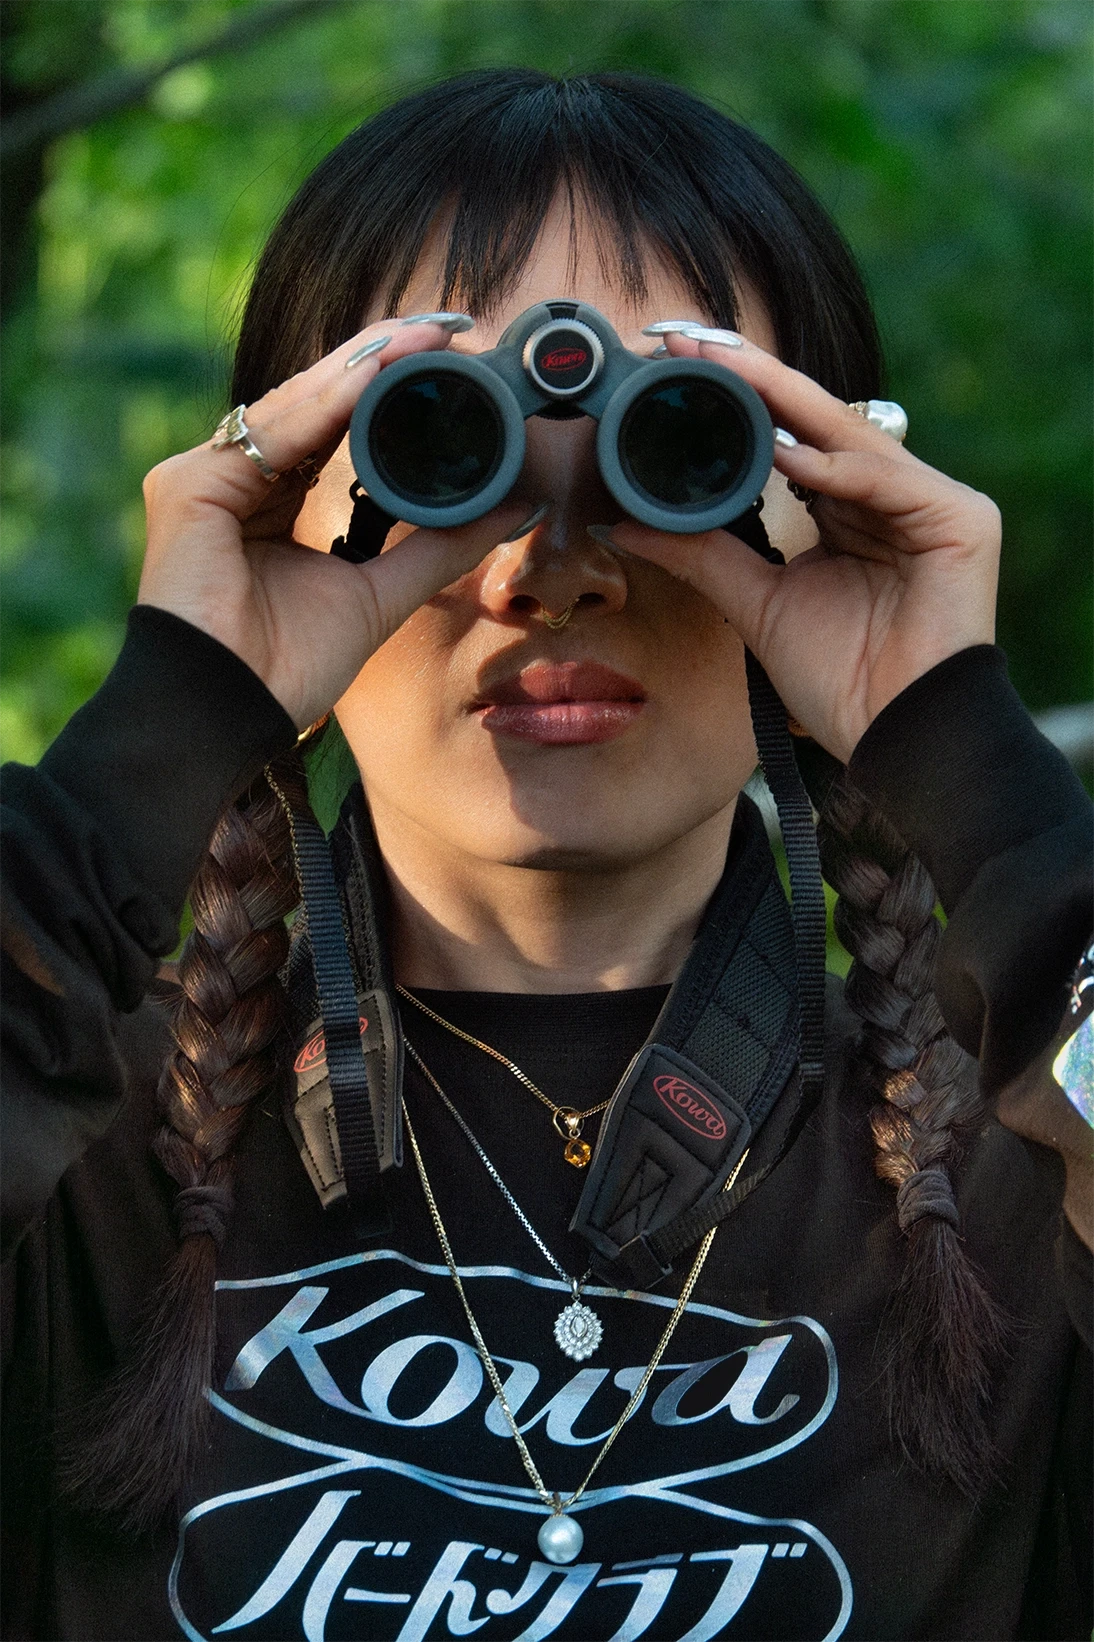 A woman wearing a Kowa and BIRD CLUB-branded shirt and necklace uses Kowa binoculars for bird watching in a lush, green environment. The image highlights her connection to ornithology, birding, and her role as a naturalist. Kowa optics and apparel are part of a sustainable brand dedicated to high-quality, ethical products